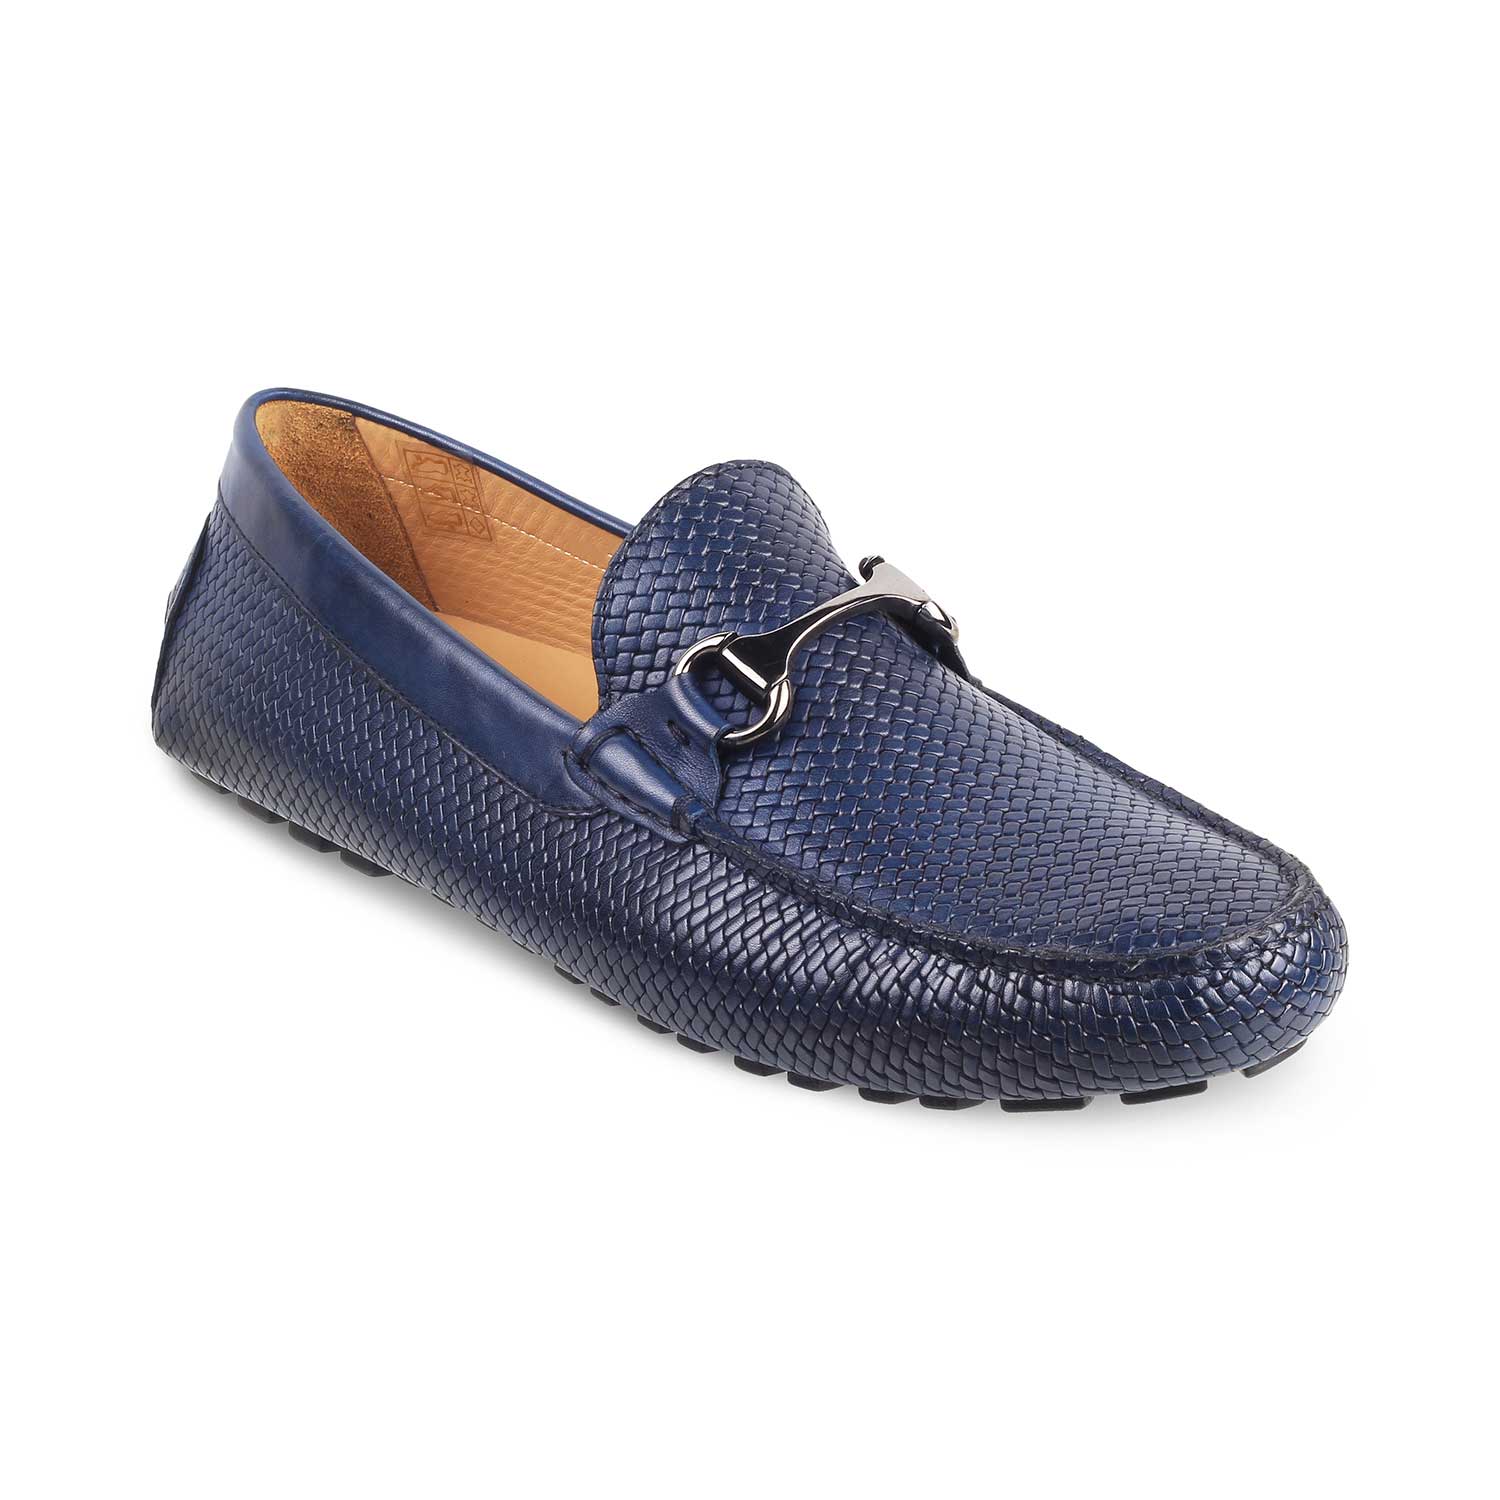 Tresmode-The Monaco-2 Blue Men's Handcrafted Leather Driving Loafers Tresmode-Tresmode